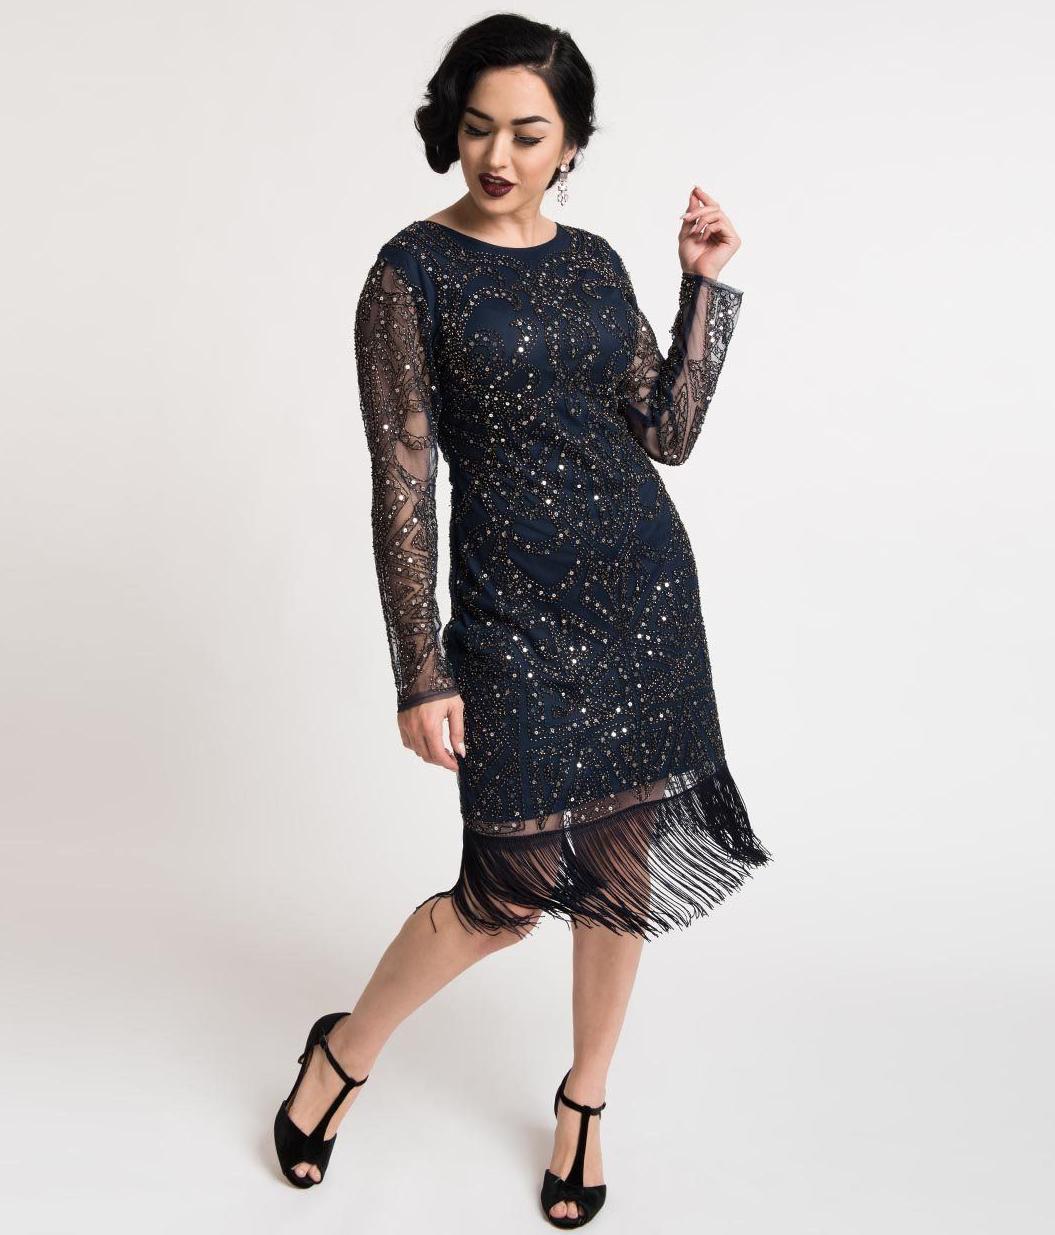 Black Sequin Cocktail Dresses With Sleeves: You Favorite Choice For Special Events 2023